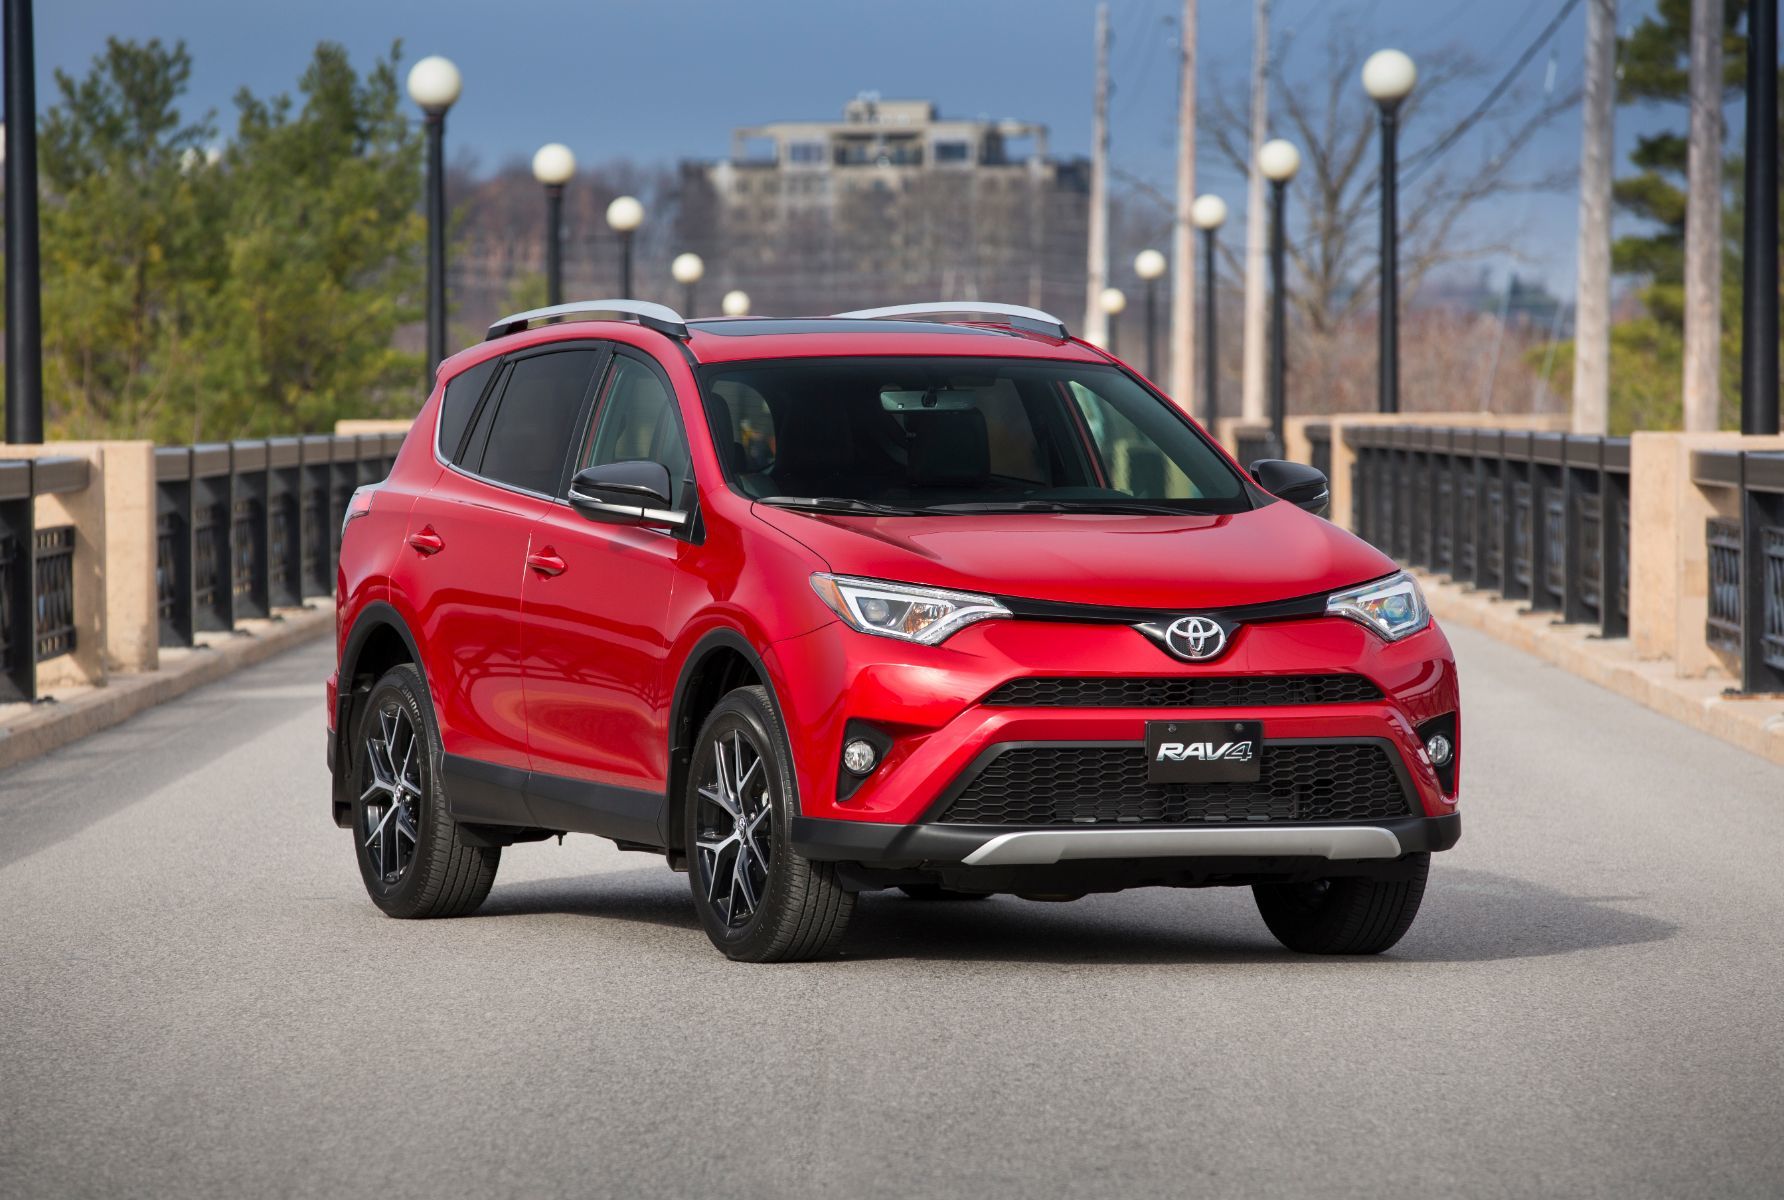 Why choose your pre-owned Toyota RAV4 at Longueuil Toyota